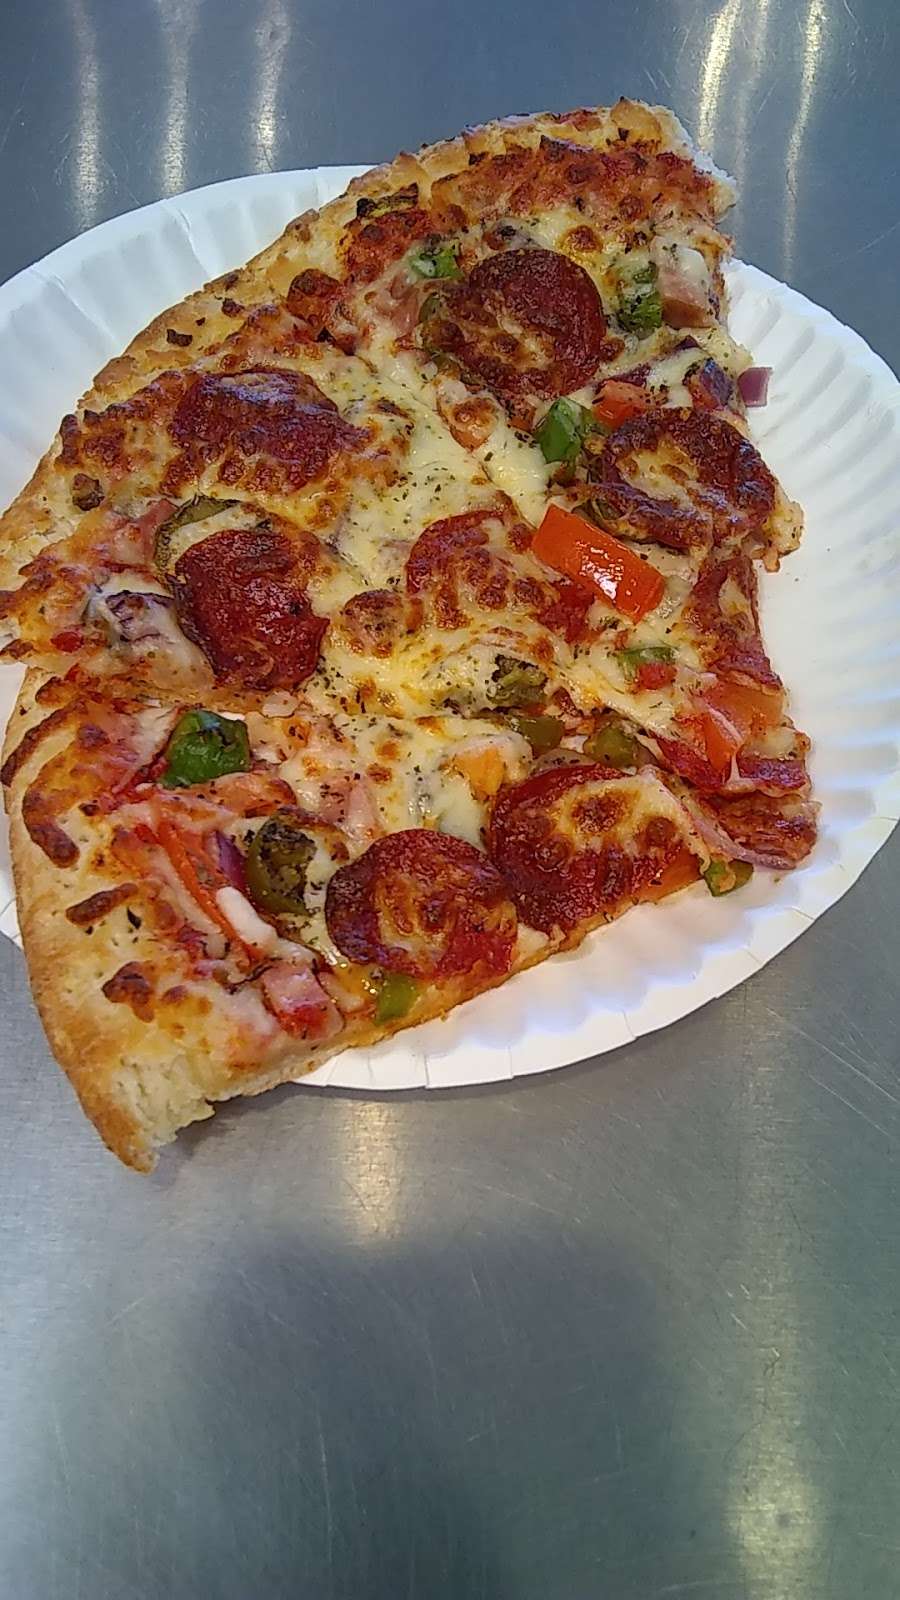 New York Pizza Garden | 9522 E 126th St, Fishers, IN 46038, USA | Phone: (317) 284-1163